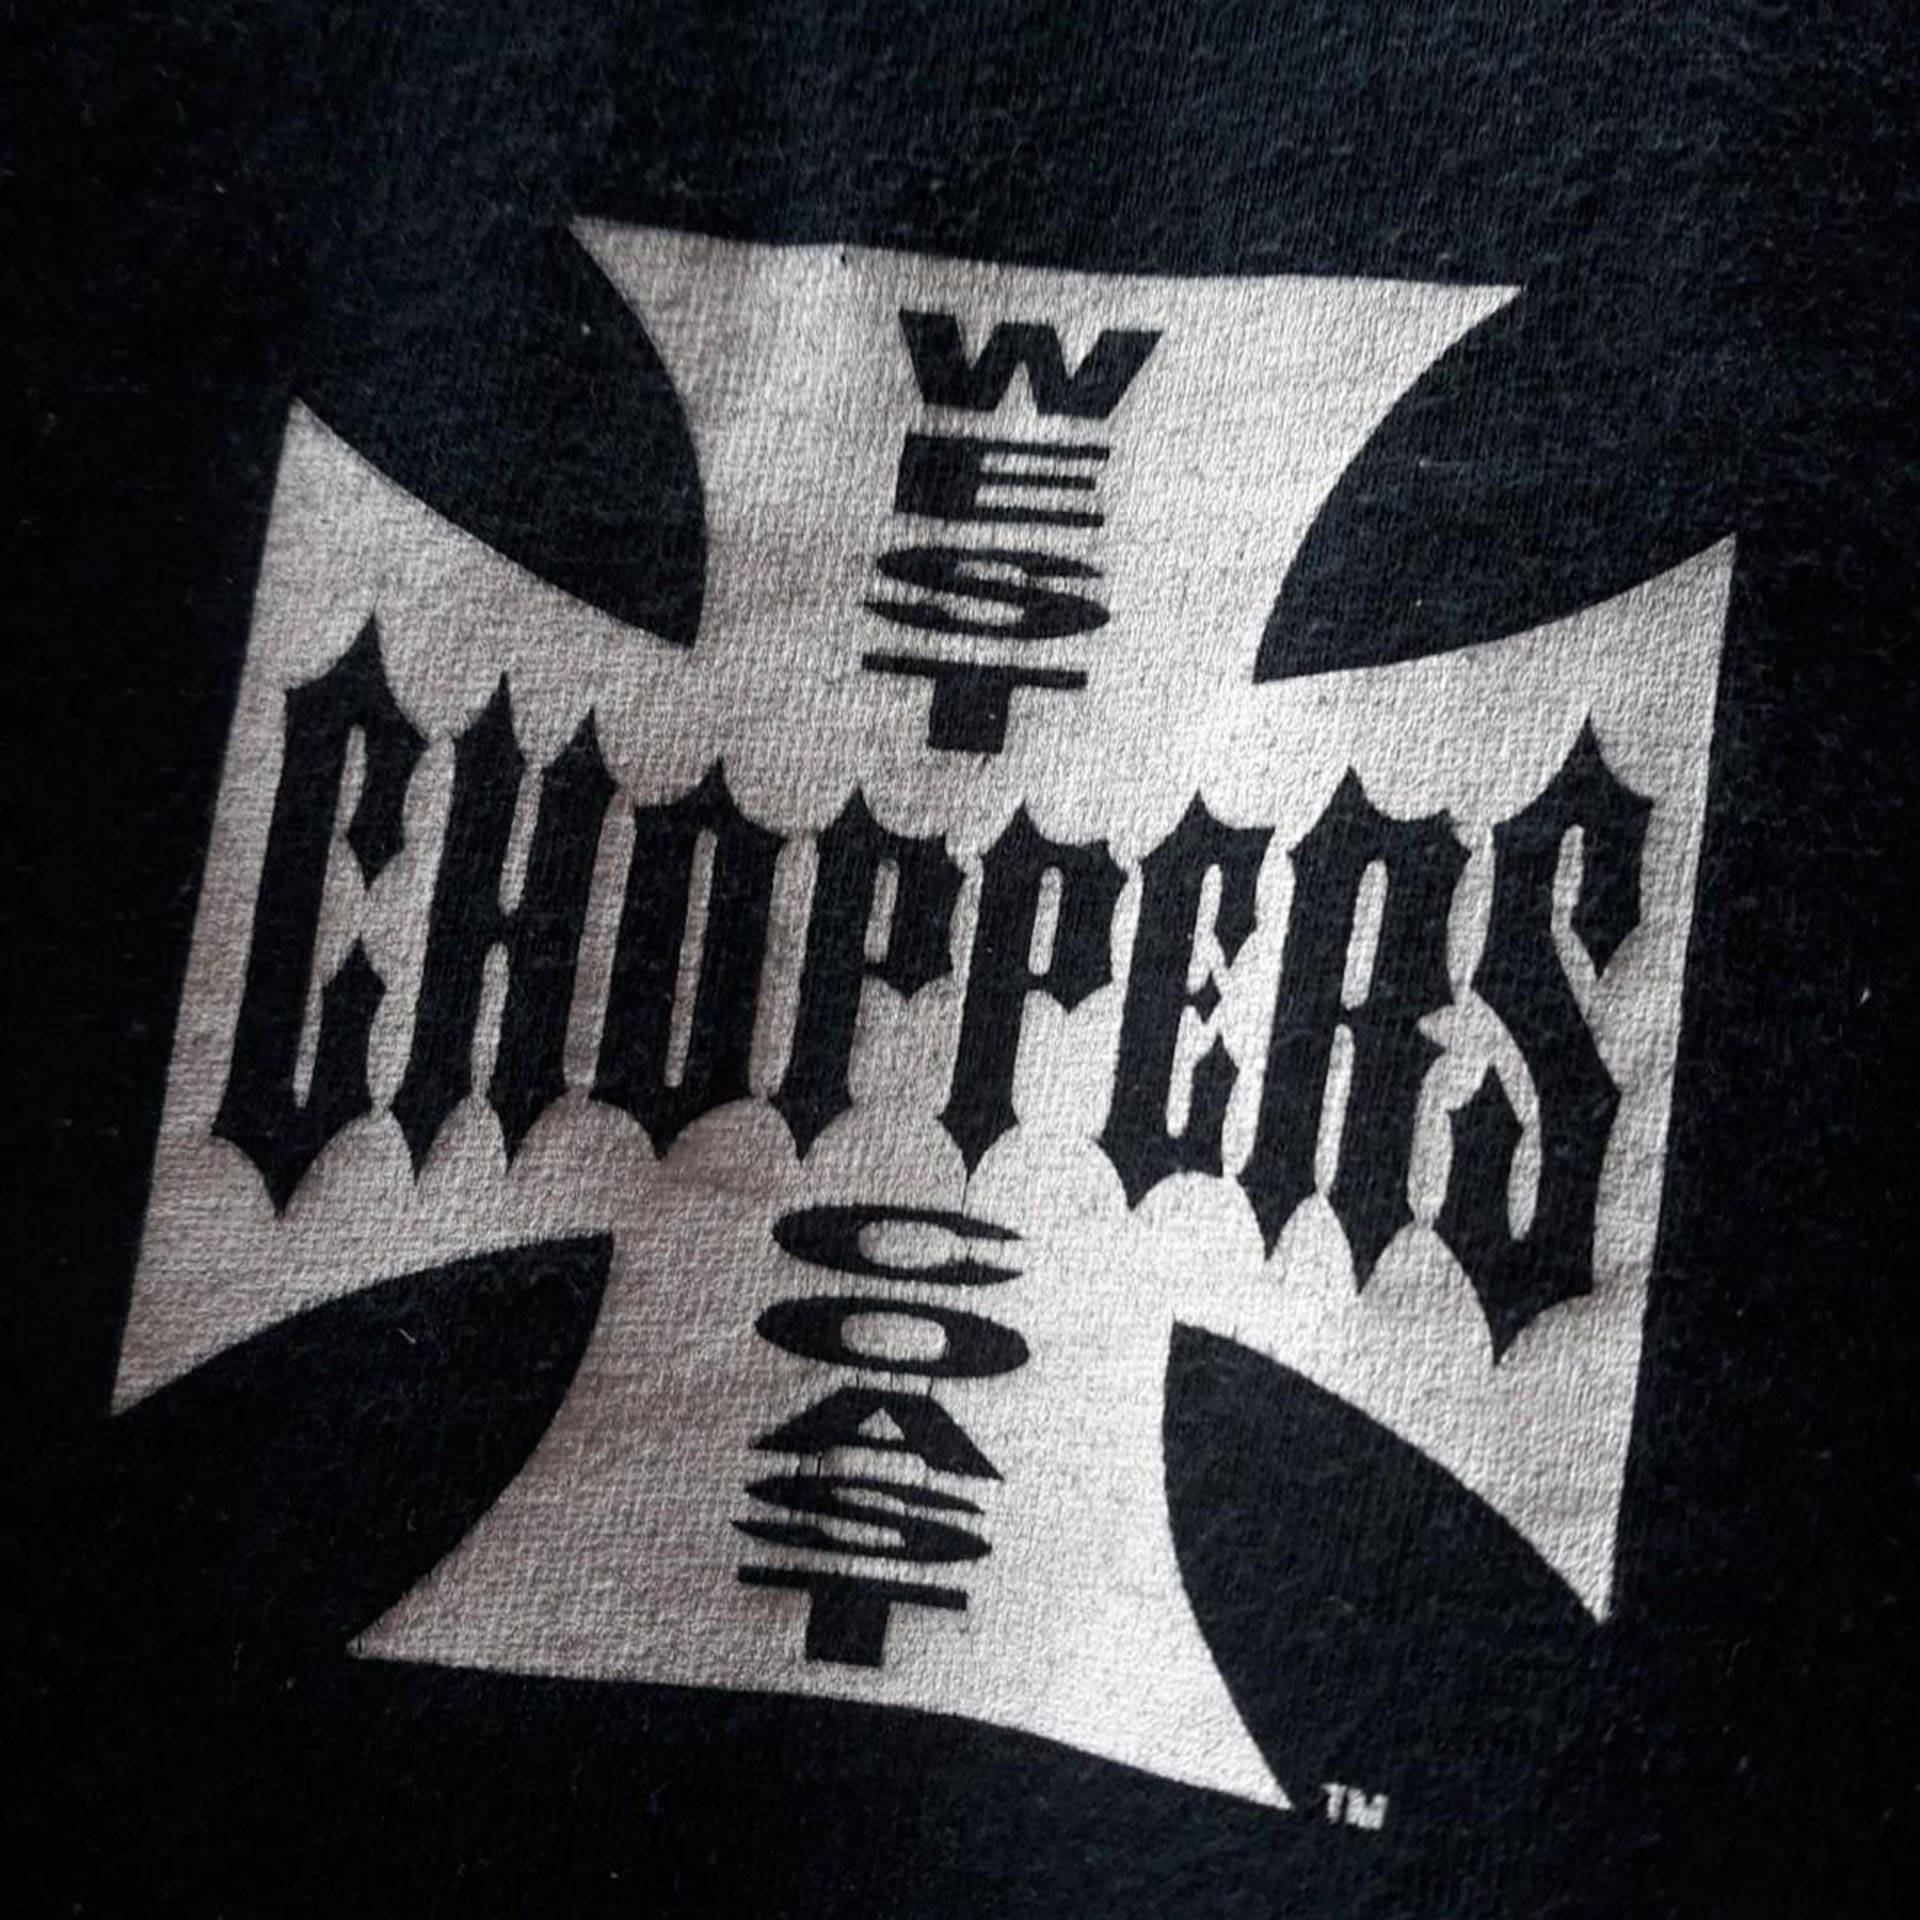 The Vibrant And Iconic Logo Of West Coast Choppers